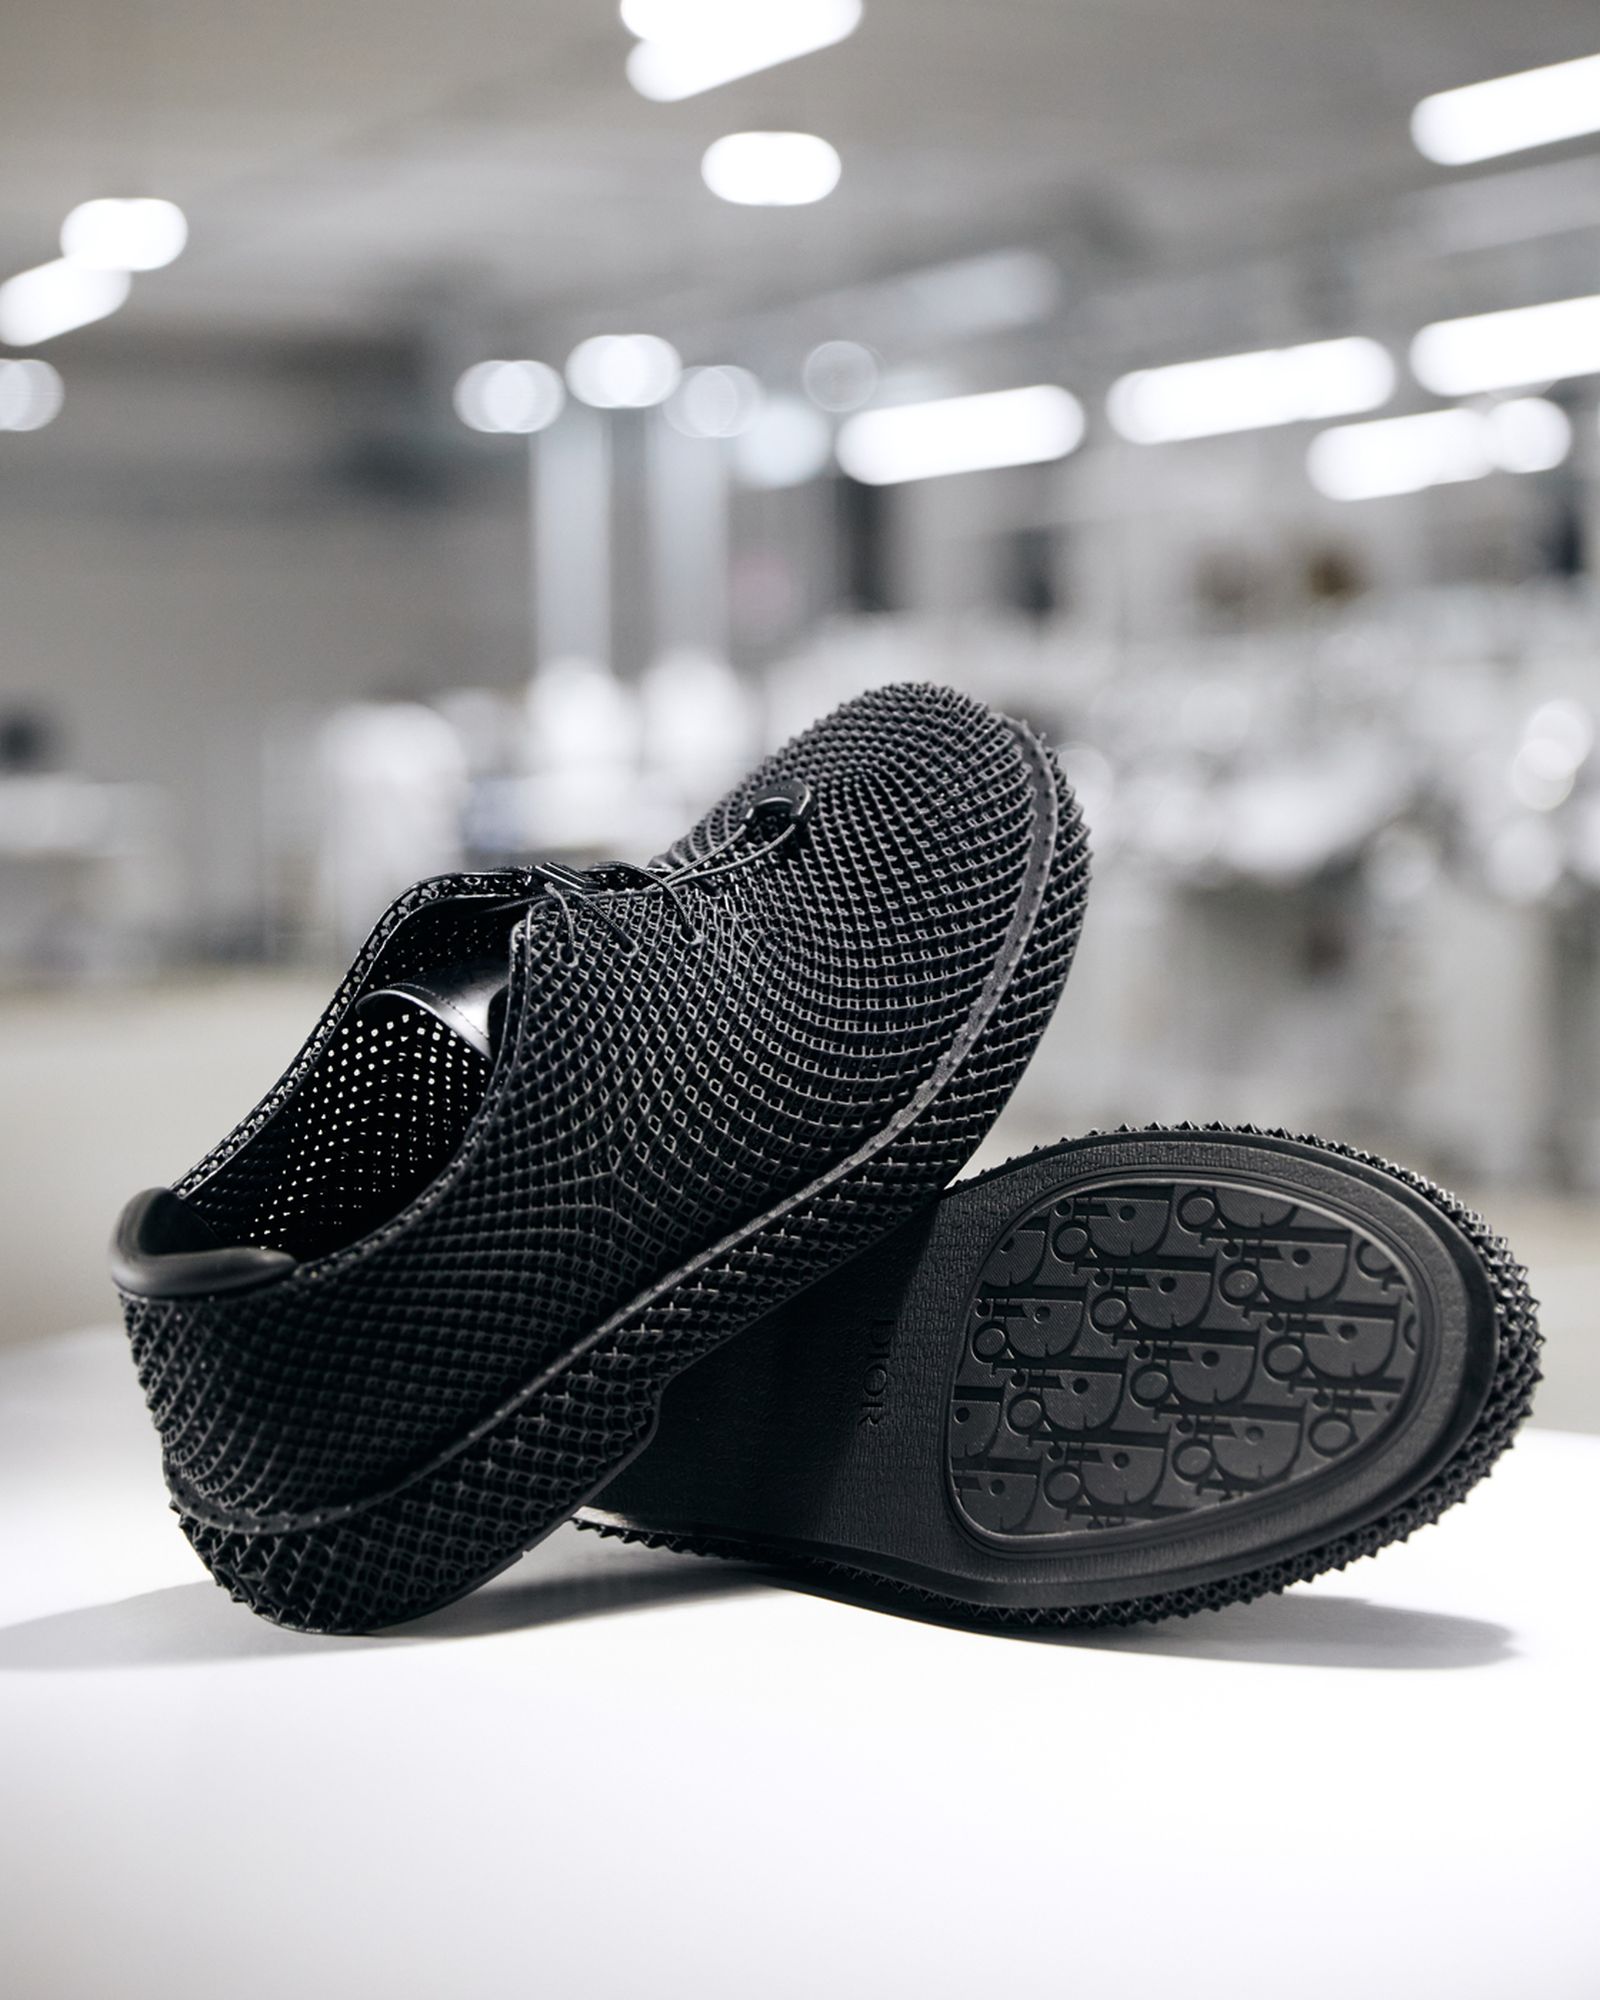 Reebok and Dior Debut 3D Printed Shoes at Paris Fashion Week   | The Voice of 3D Printing / Additive Manufacturing